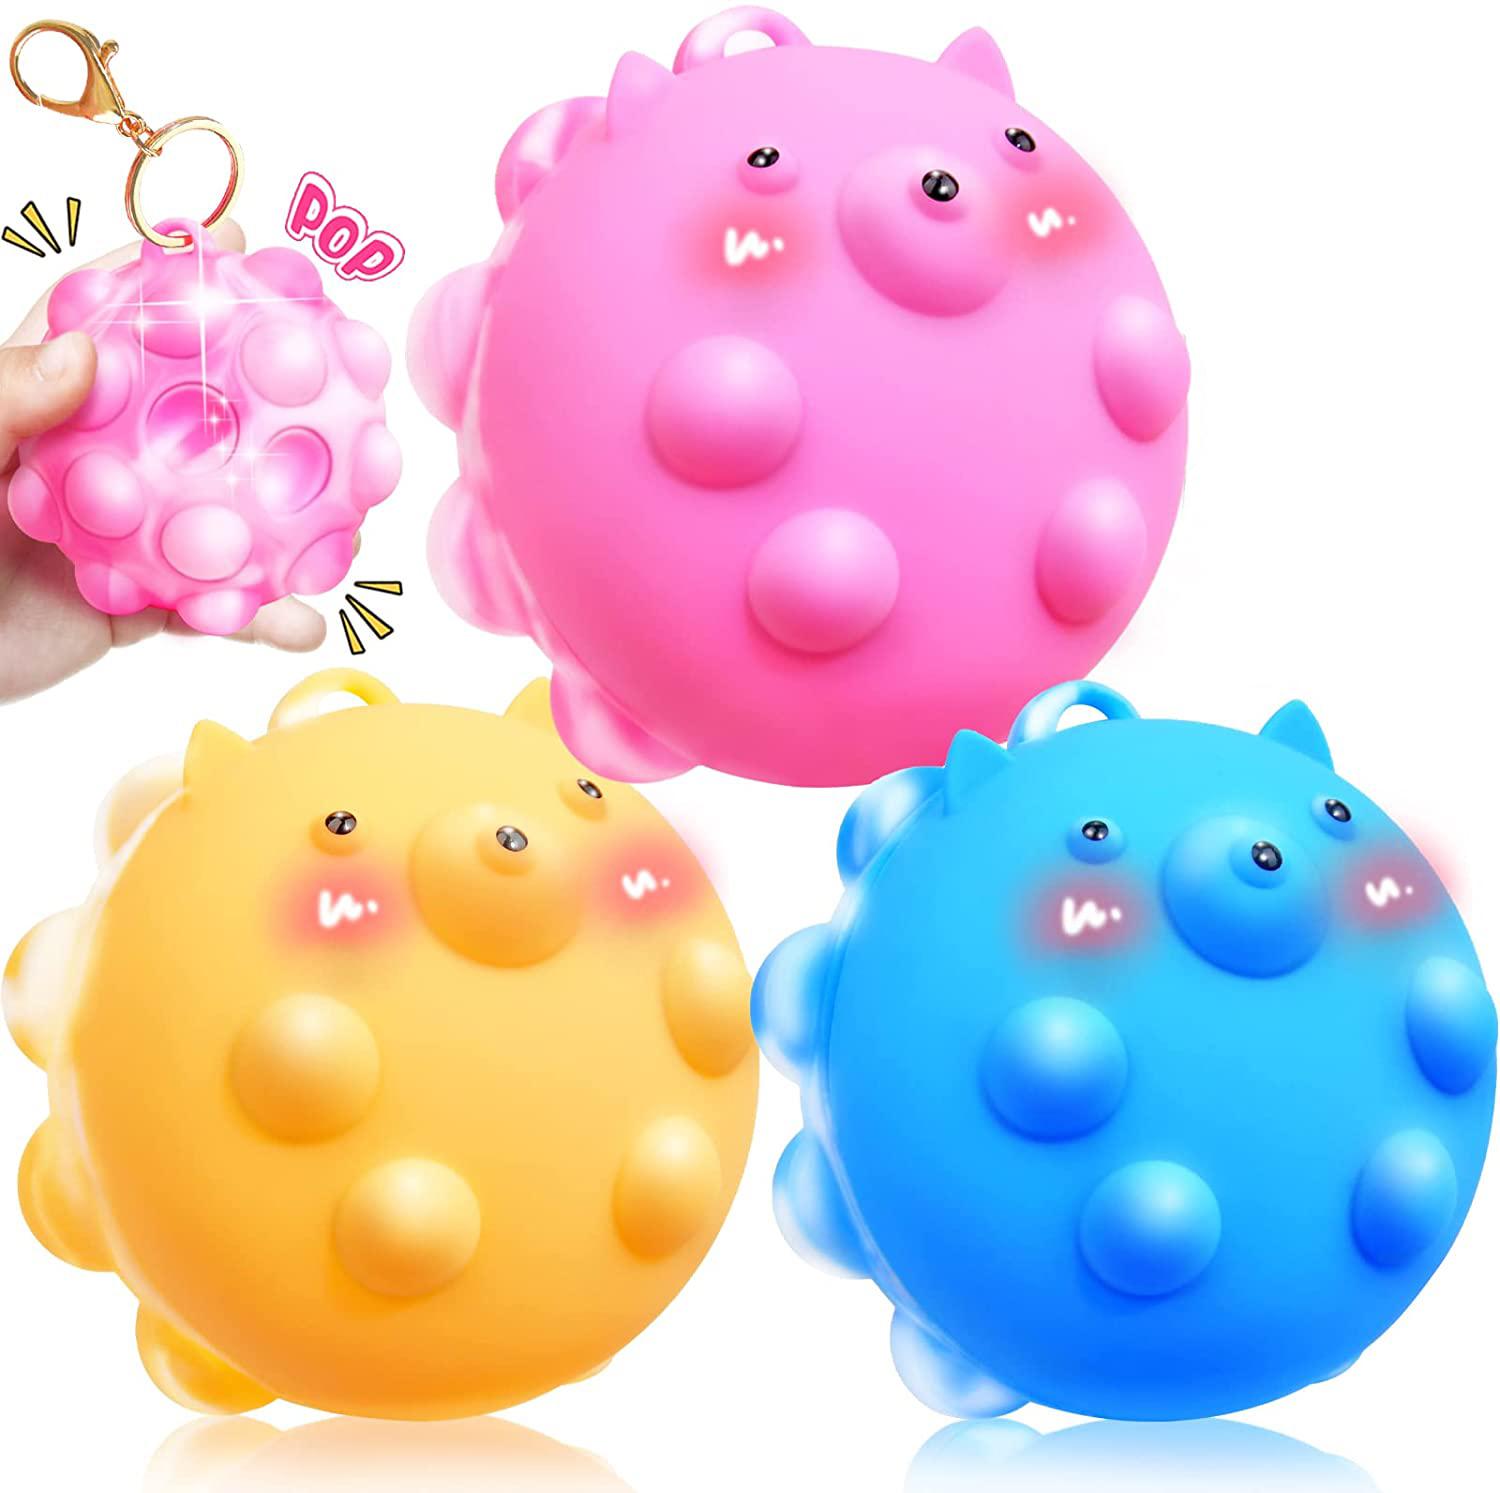 Thriving Toys 3Pcs Pop Ball Fidget Toys, Pop Stress Balls, Squeeze Sensory Toy 3D Silicone Pop Push Bubble Bouncing Fidget Ball Anxiety Stress Relief for Girls Kids